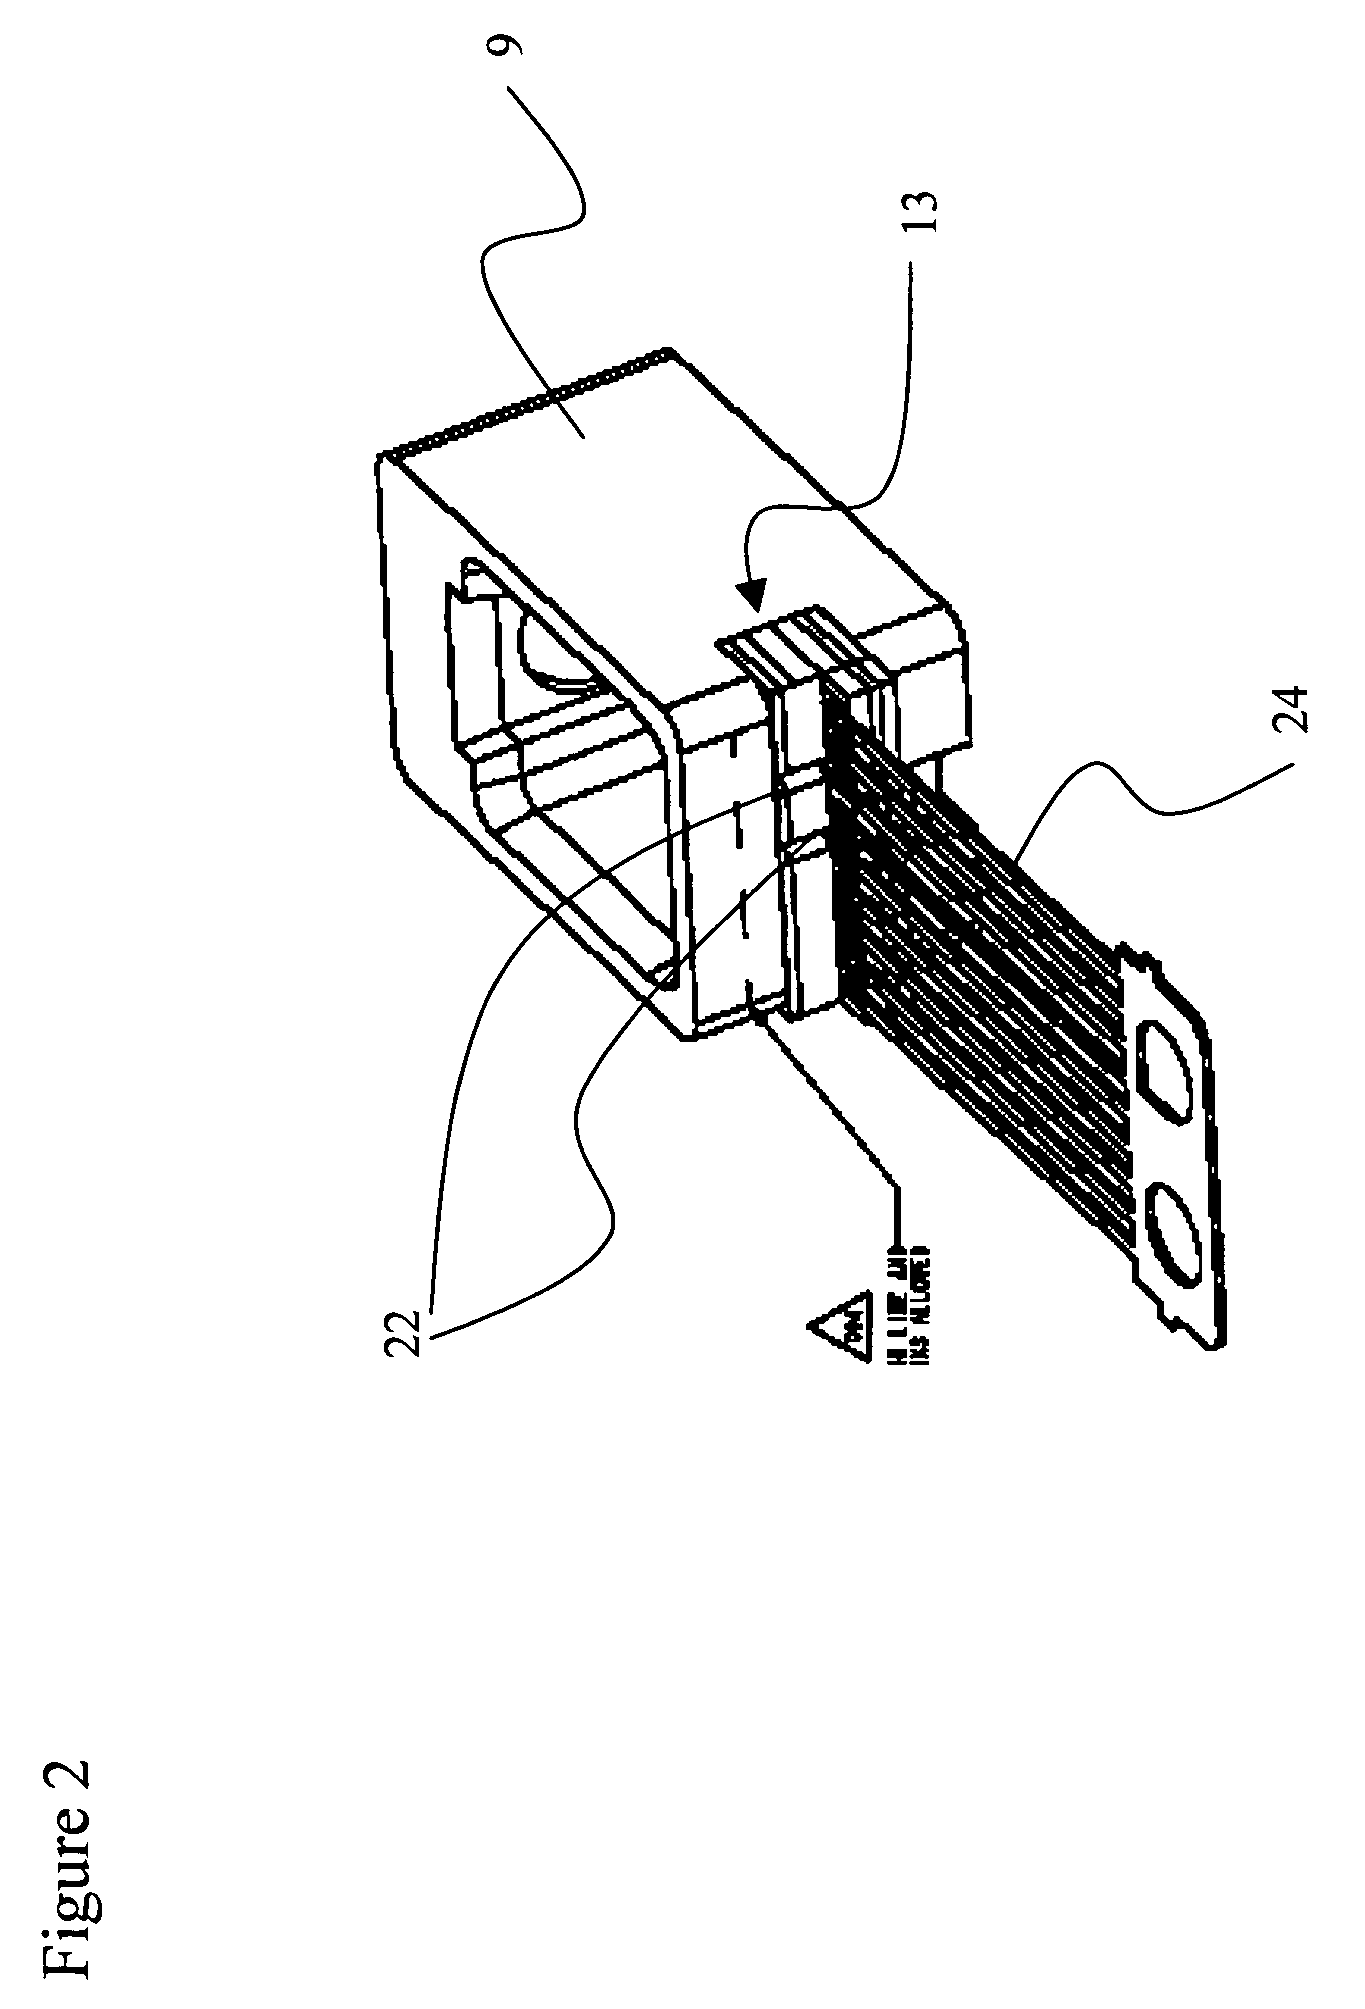 Compact optical sub-assembly